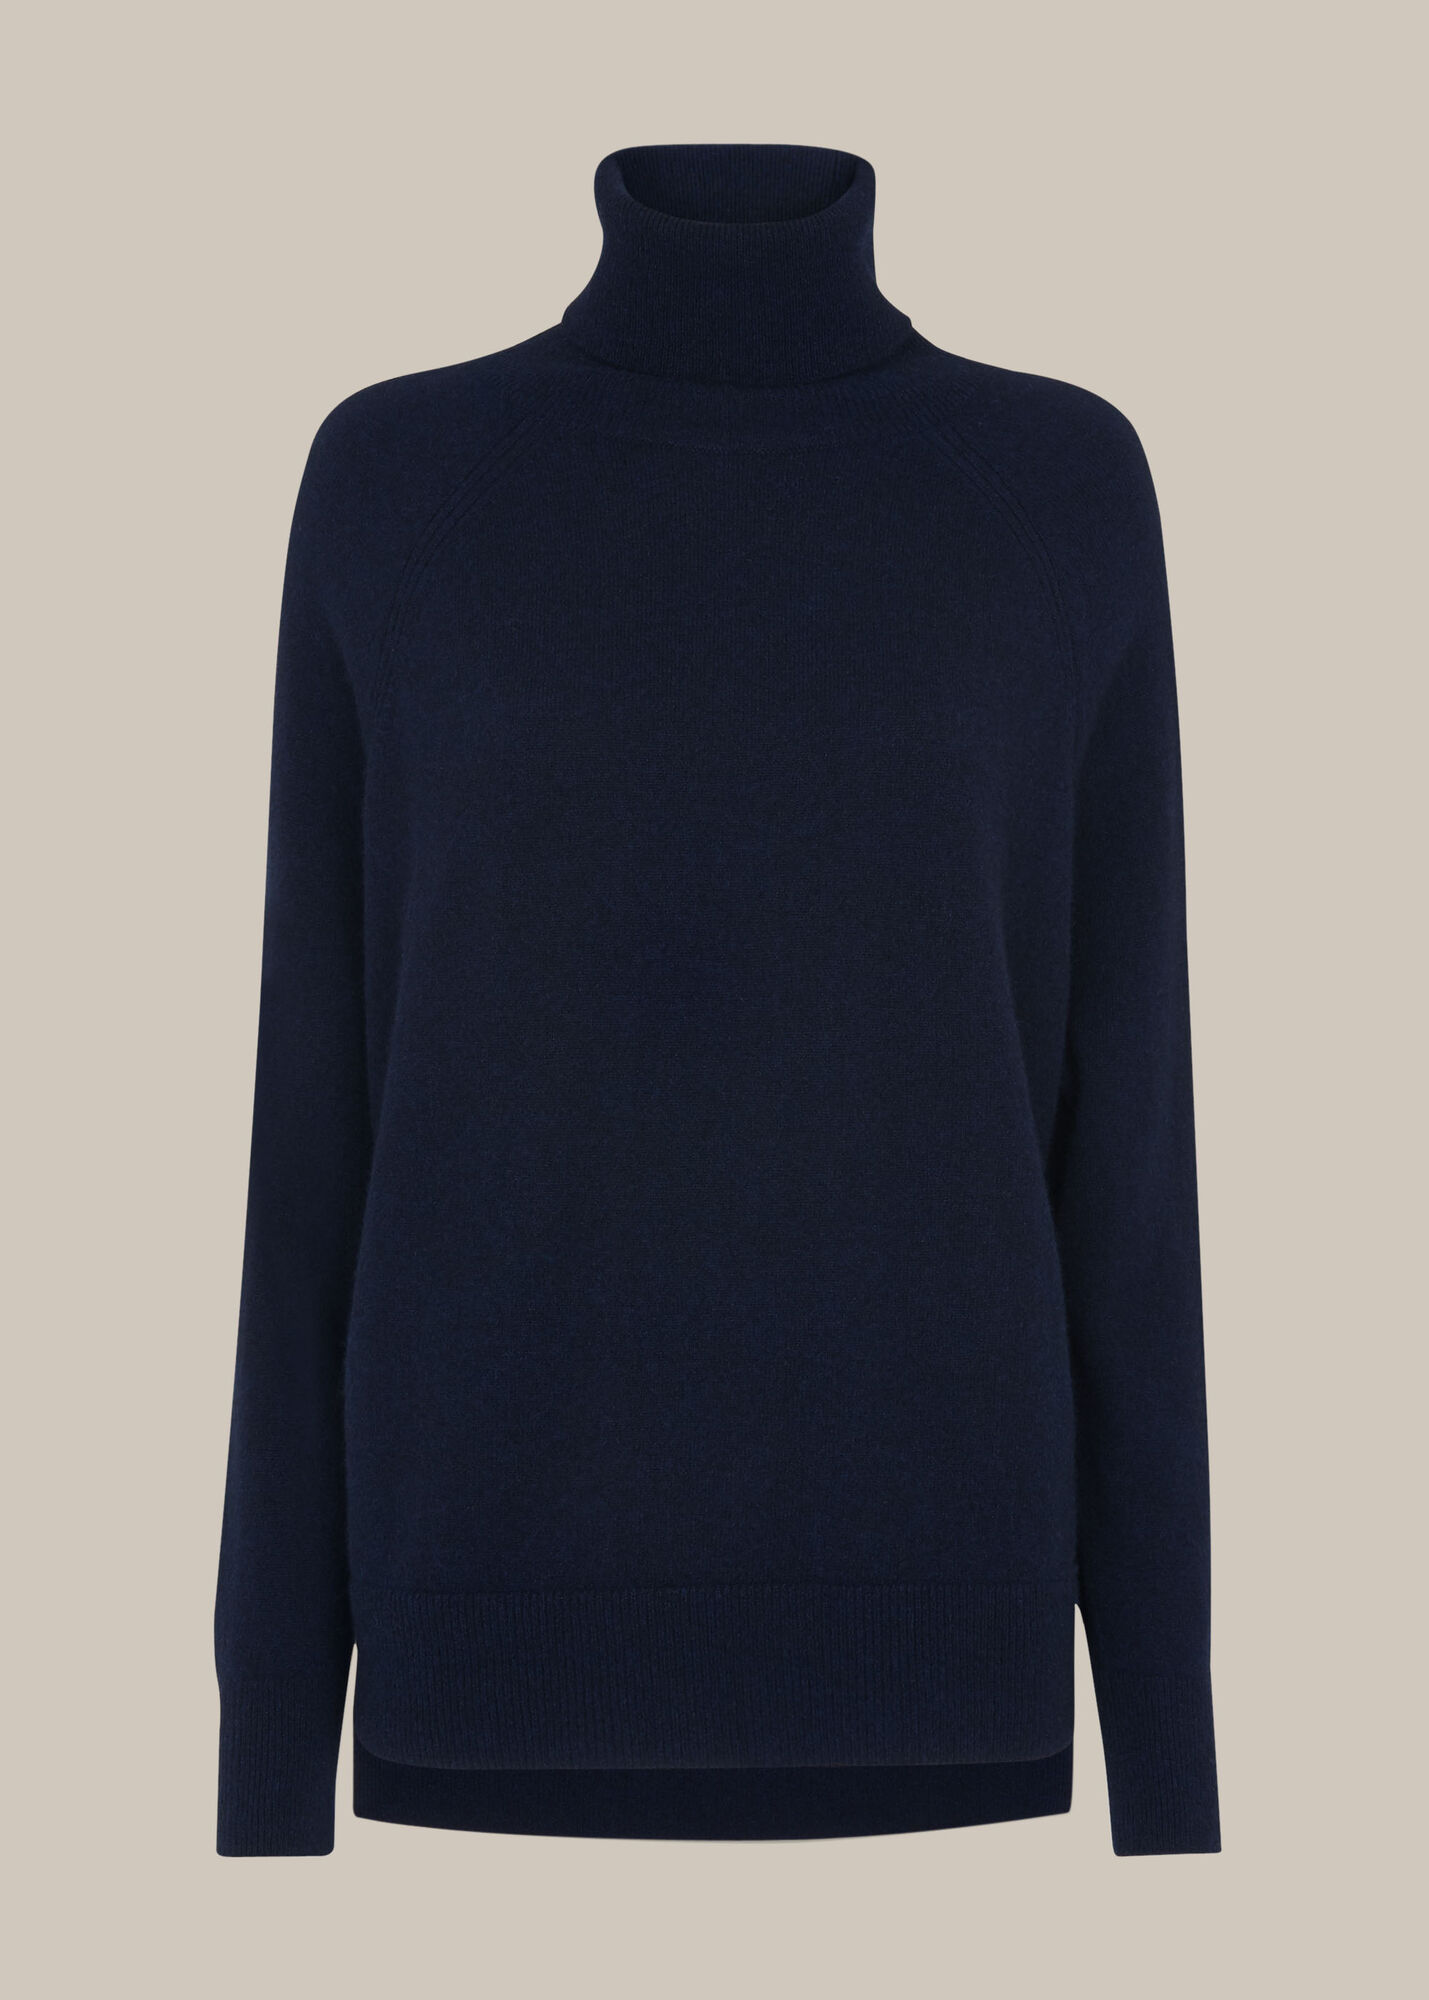 Navy Cashmere Roll Neck Knit | WHISTLES